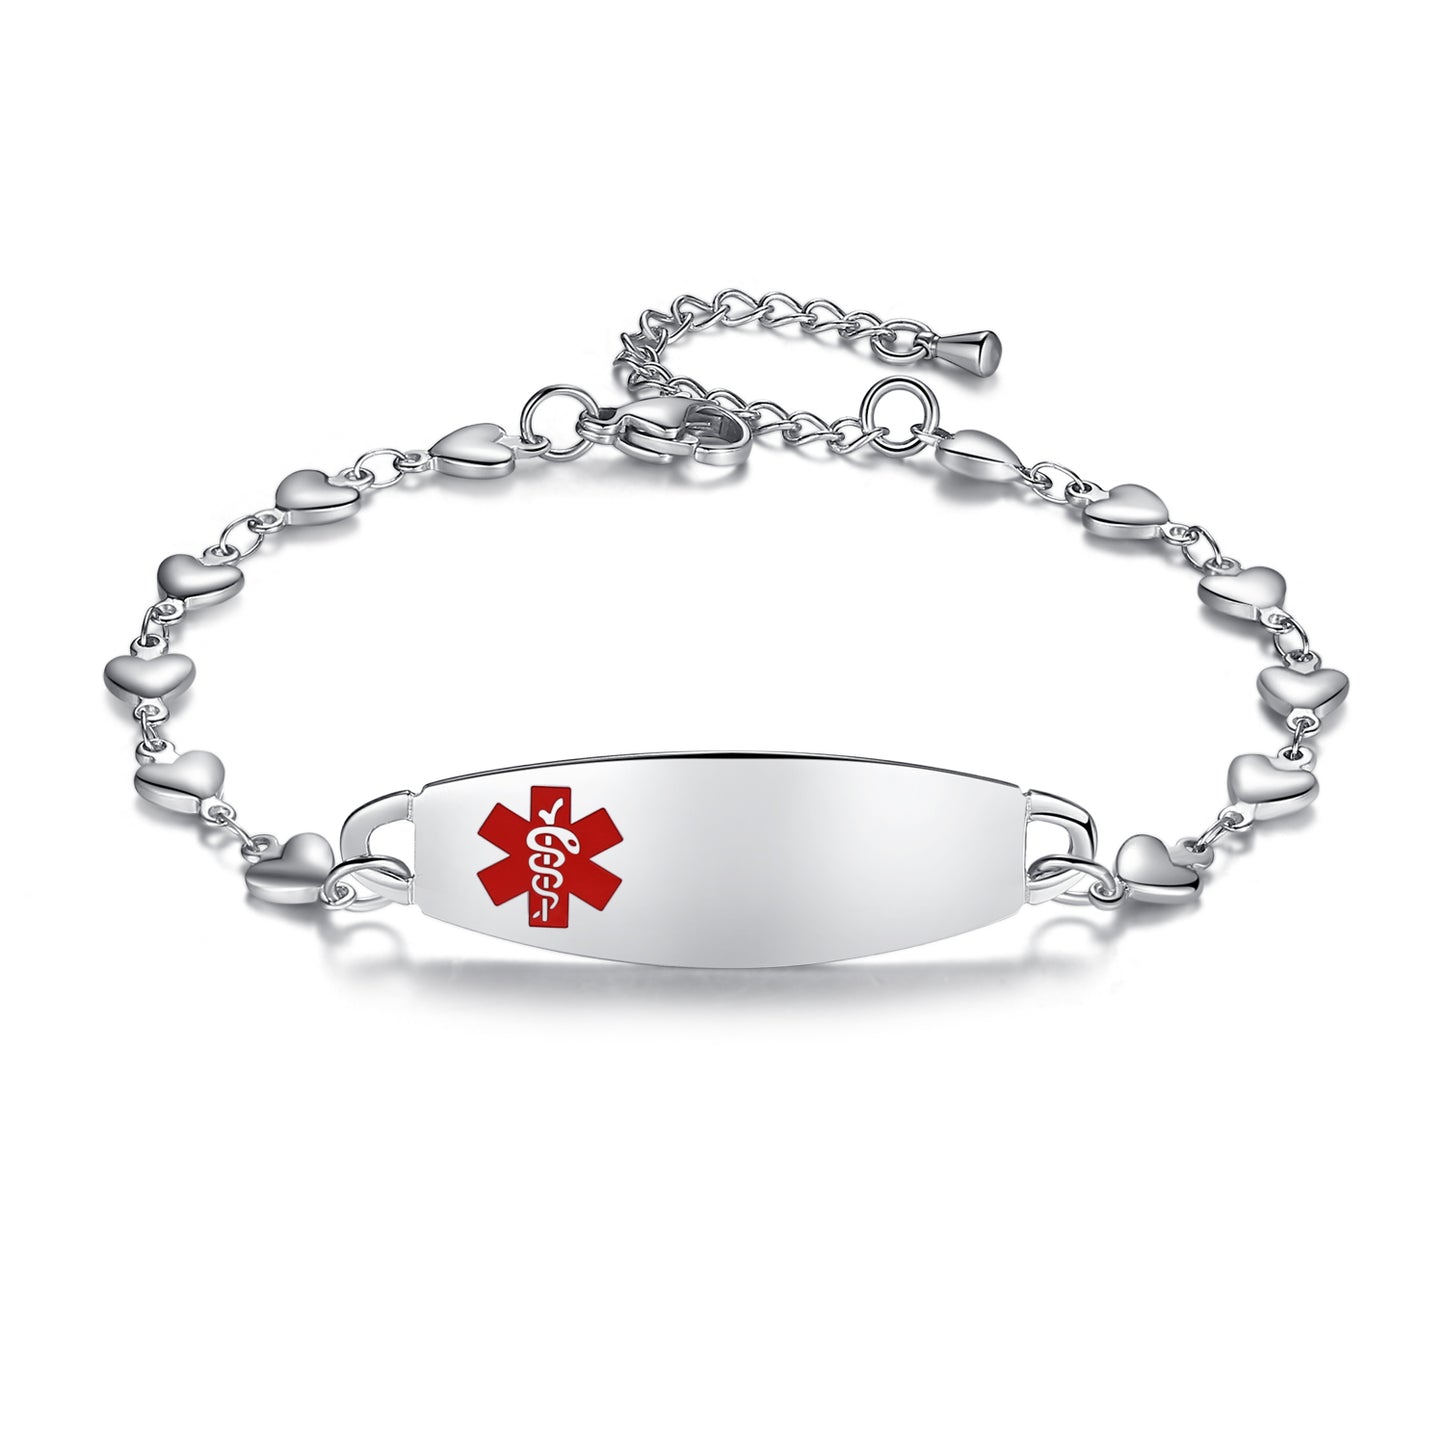 Heart Medical Alert Bracelet for Women Fashion Medical ID Jewelry 6.5-8 inches Adjustable